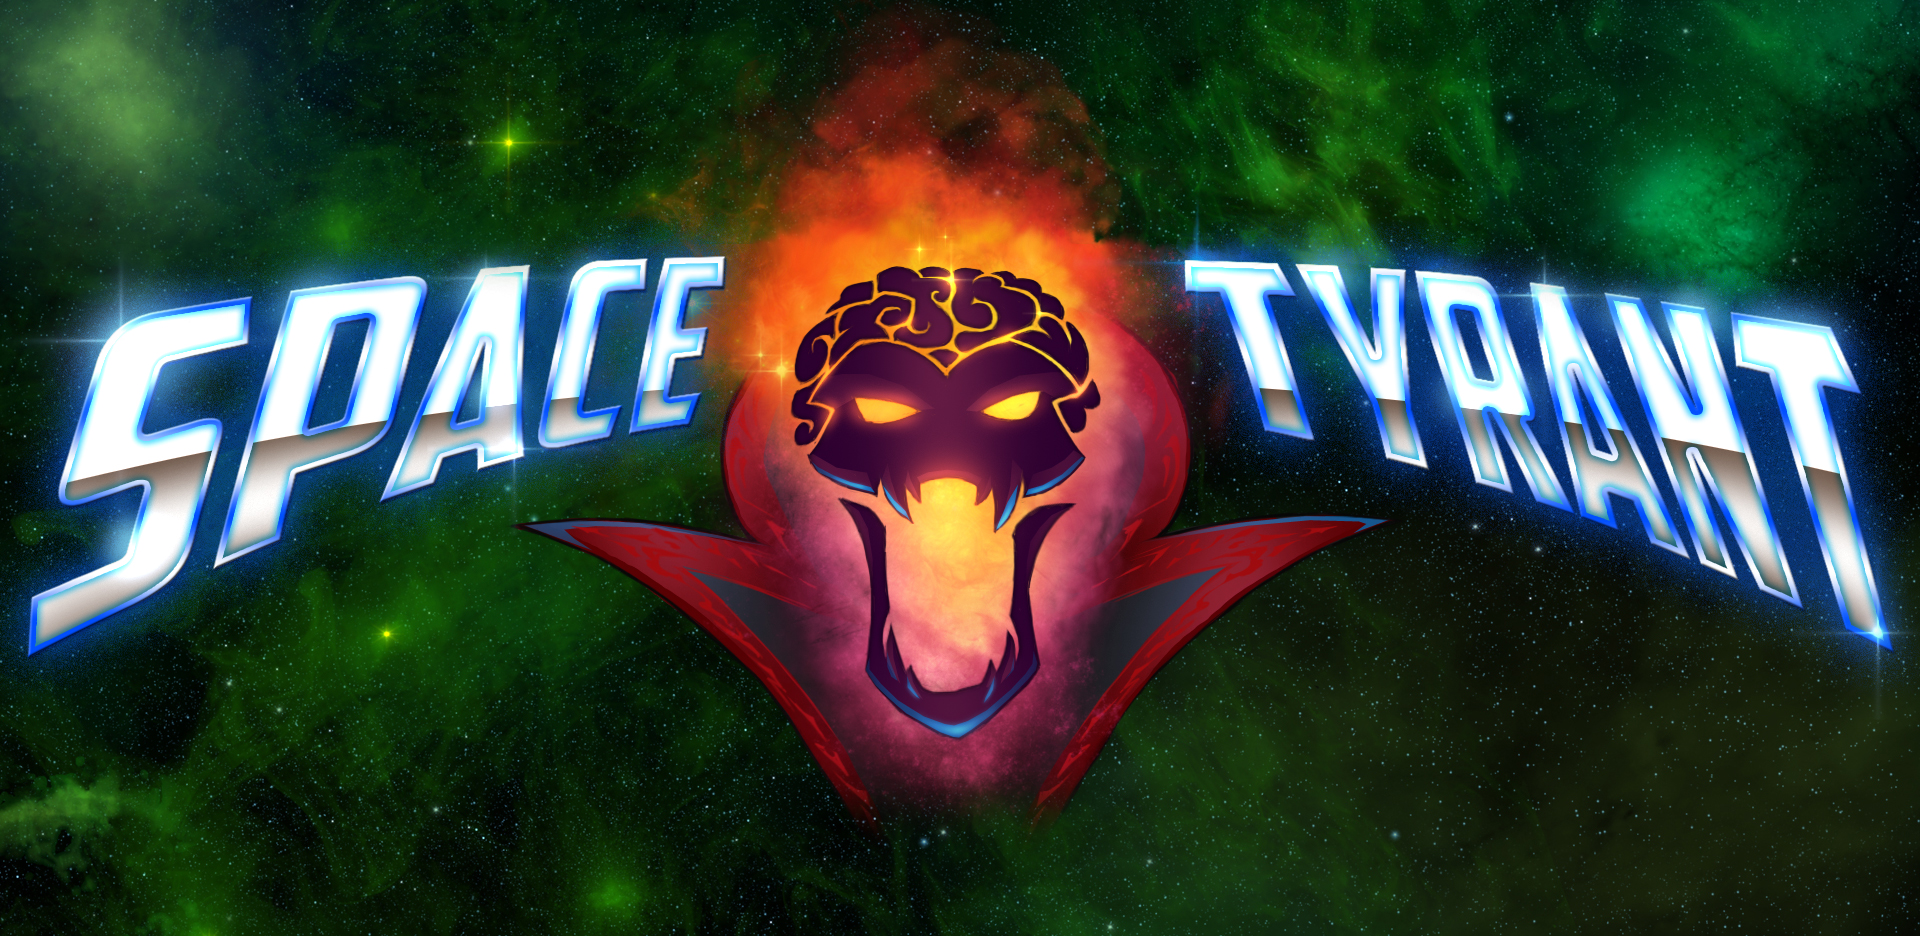 “Space Tyrant” Coming to a Galaxy near You - Build, Devastate and Slaughter Through 4x Space on Lunch